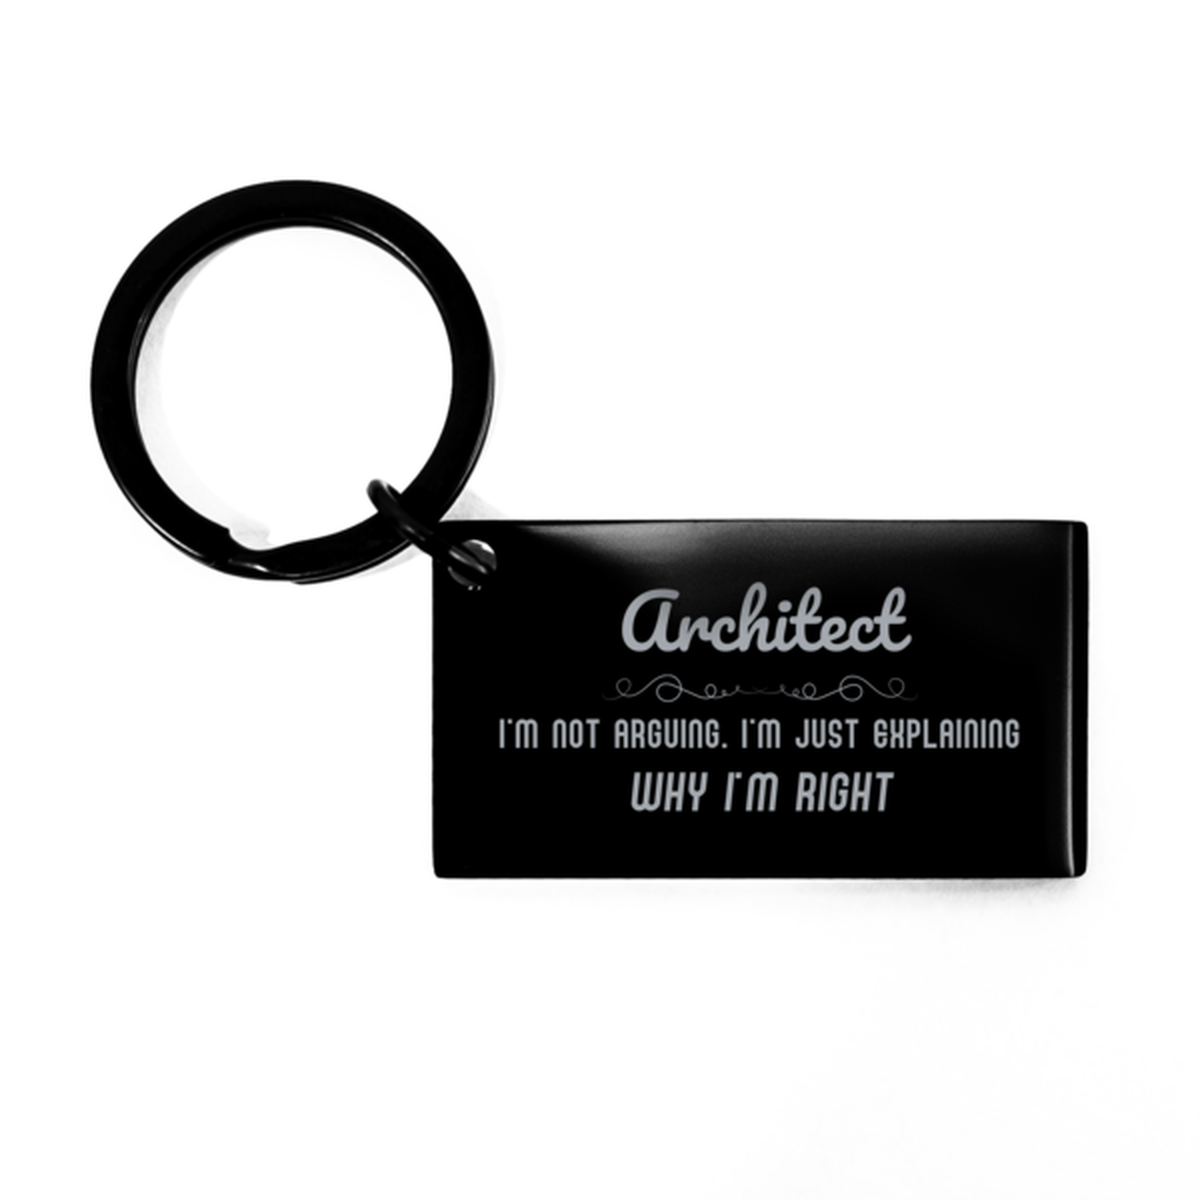 Architect I'm not Arguing. I'm Just Explaining Why I'm RIGHT Keychain, Funny Saying Quote Architect Gifts For Architect Graduation Birthday Christmas Gifts for Men Women Coworker